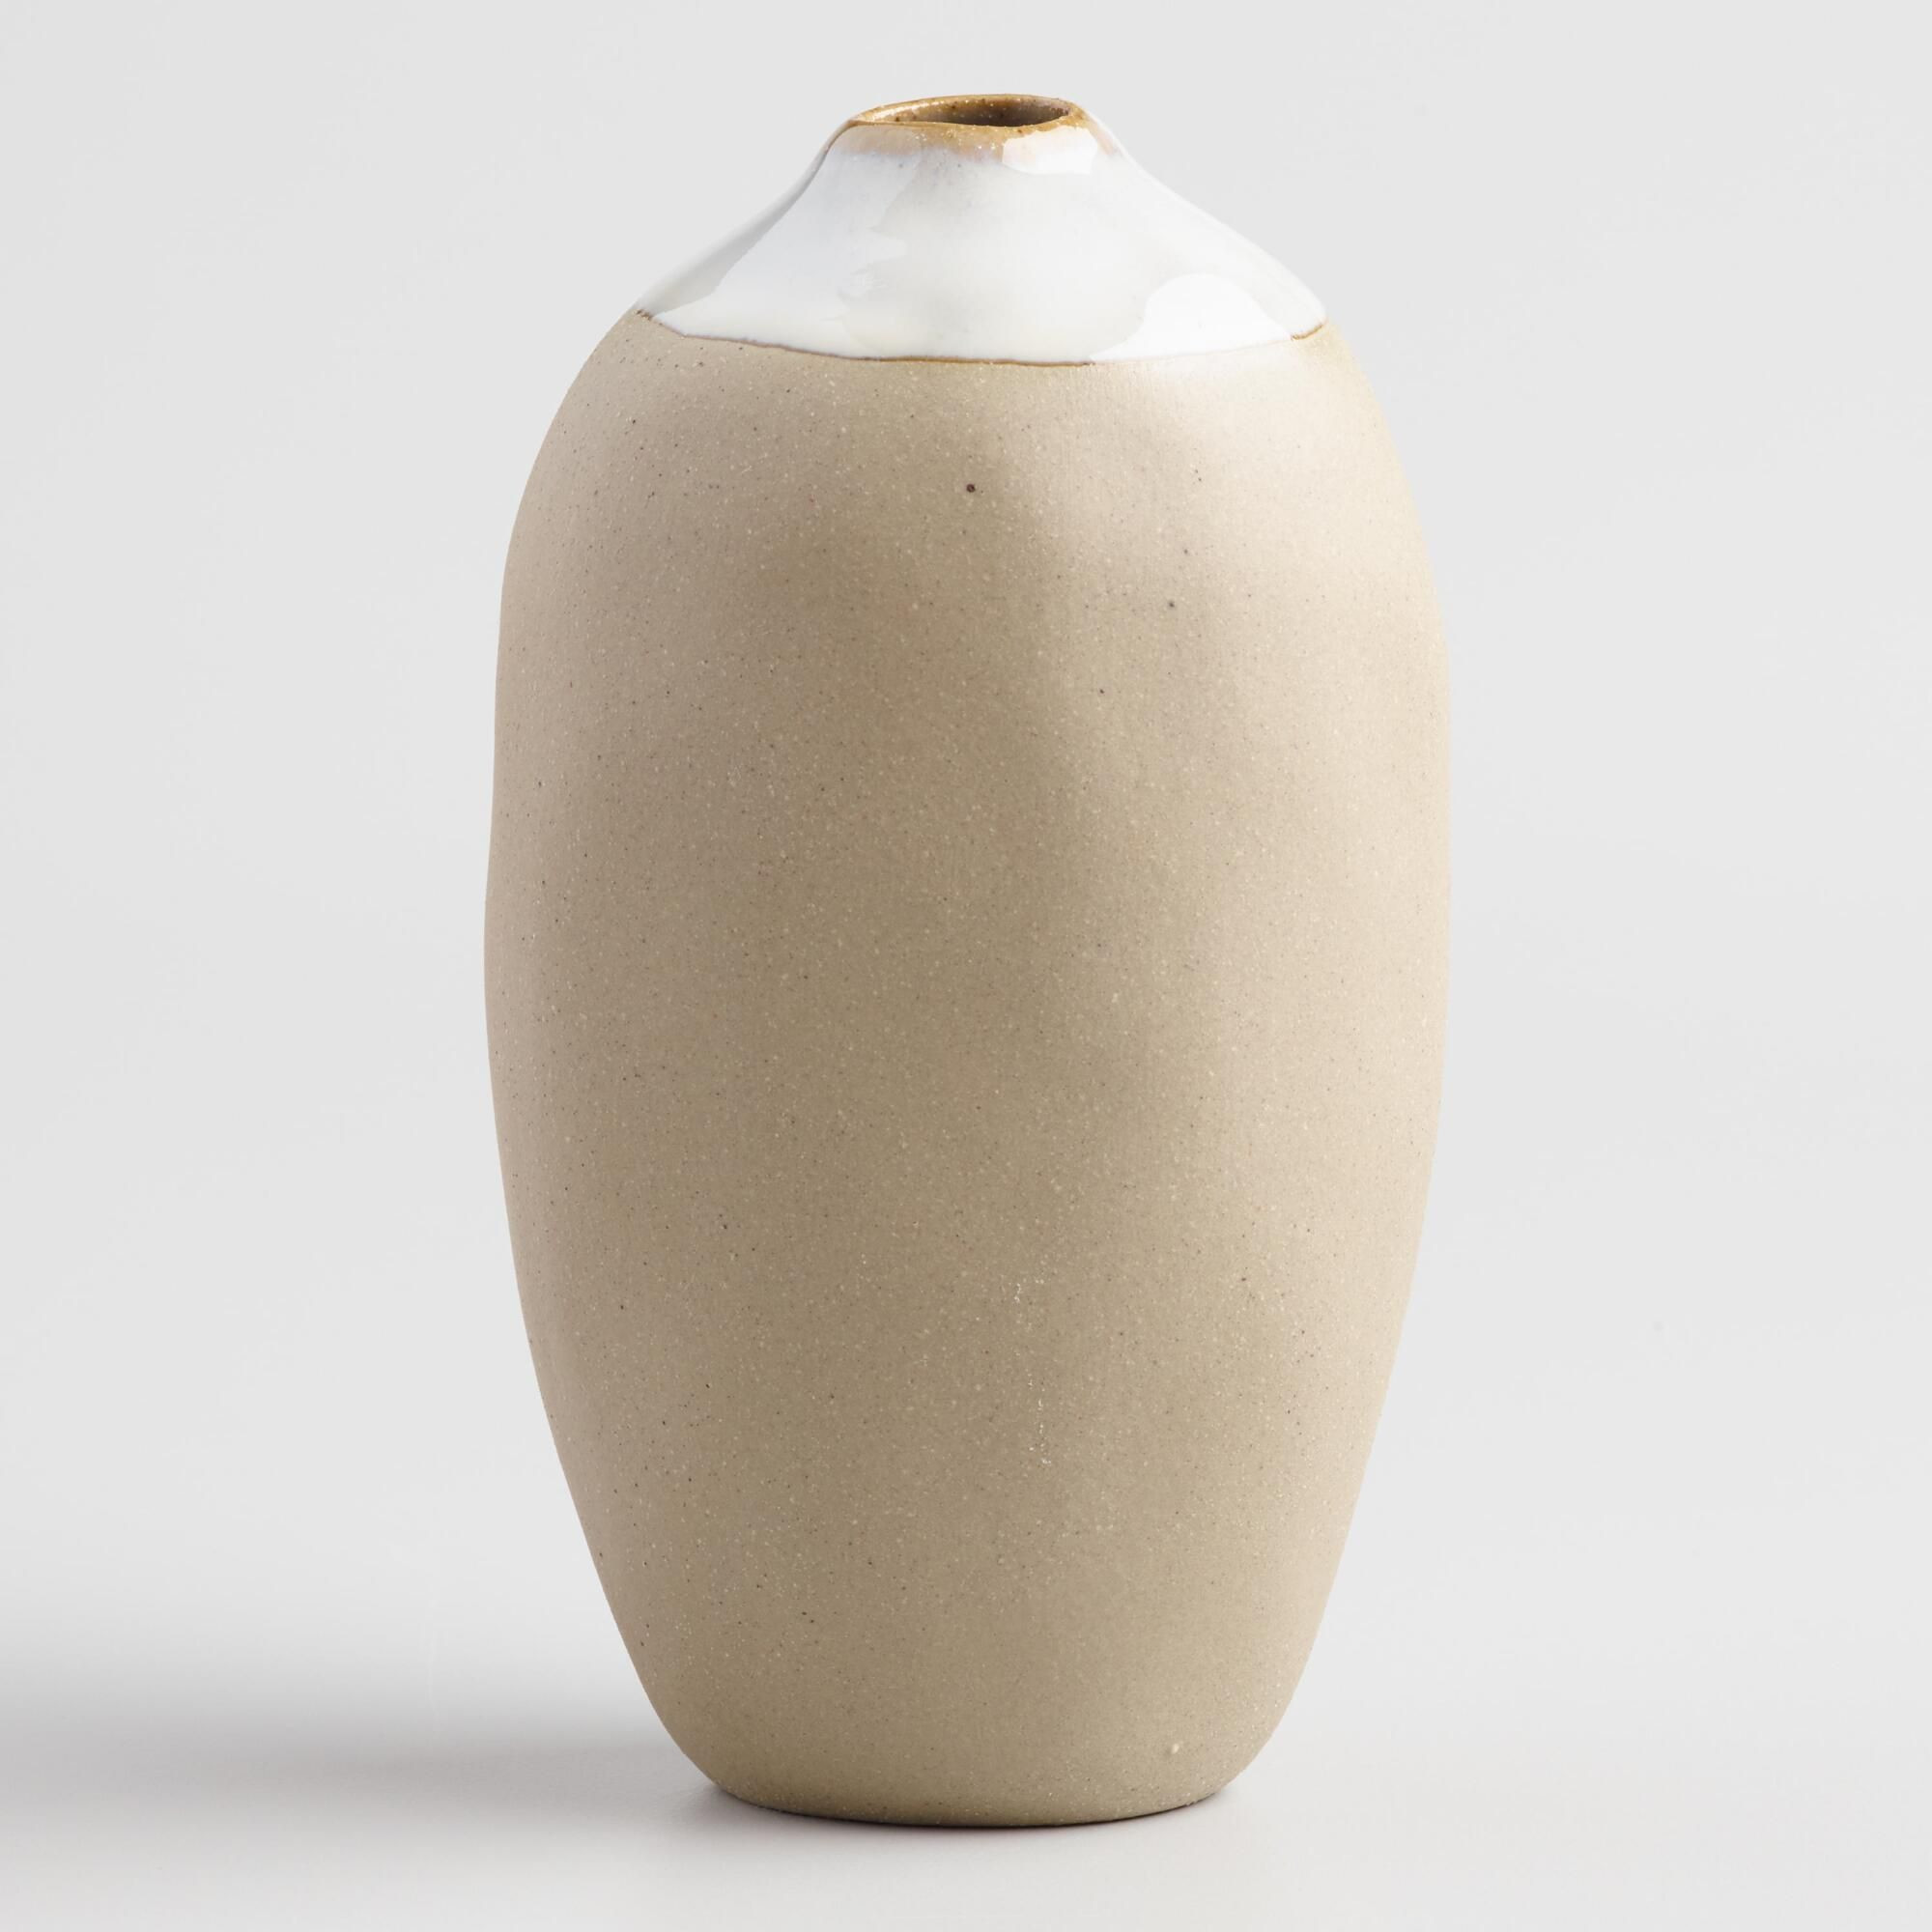 28 Fantastic Natural Stone Vase 2024 free download natural stone vase of featuring a beautiful rustic look with a textured finish and natural intended for featuring a beautiful rustic look with a textured finish and natural coloring this vas